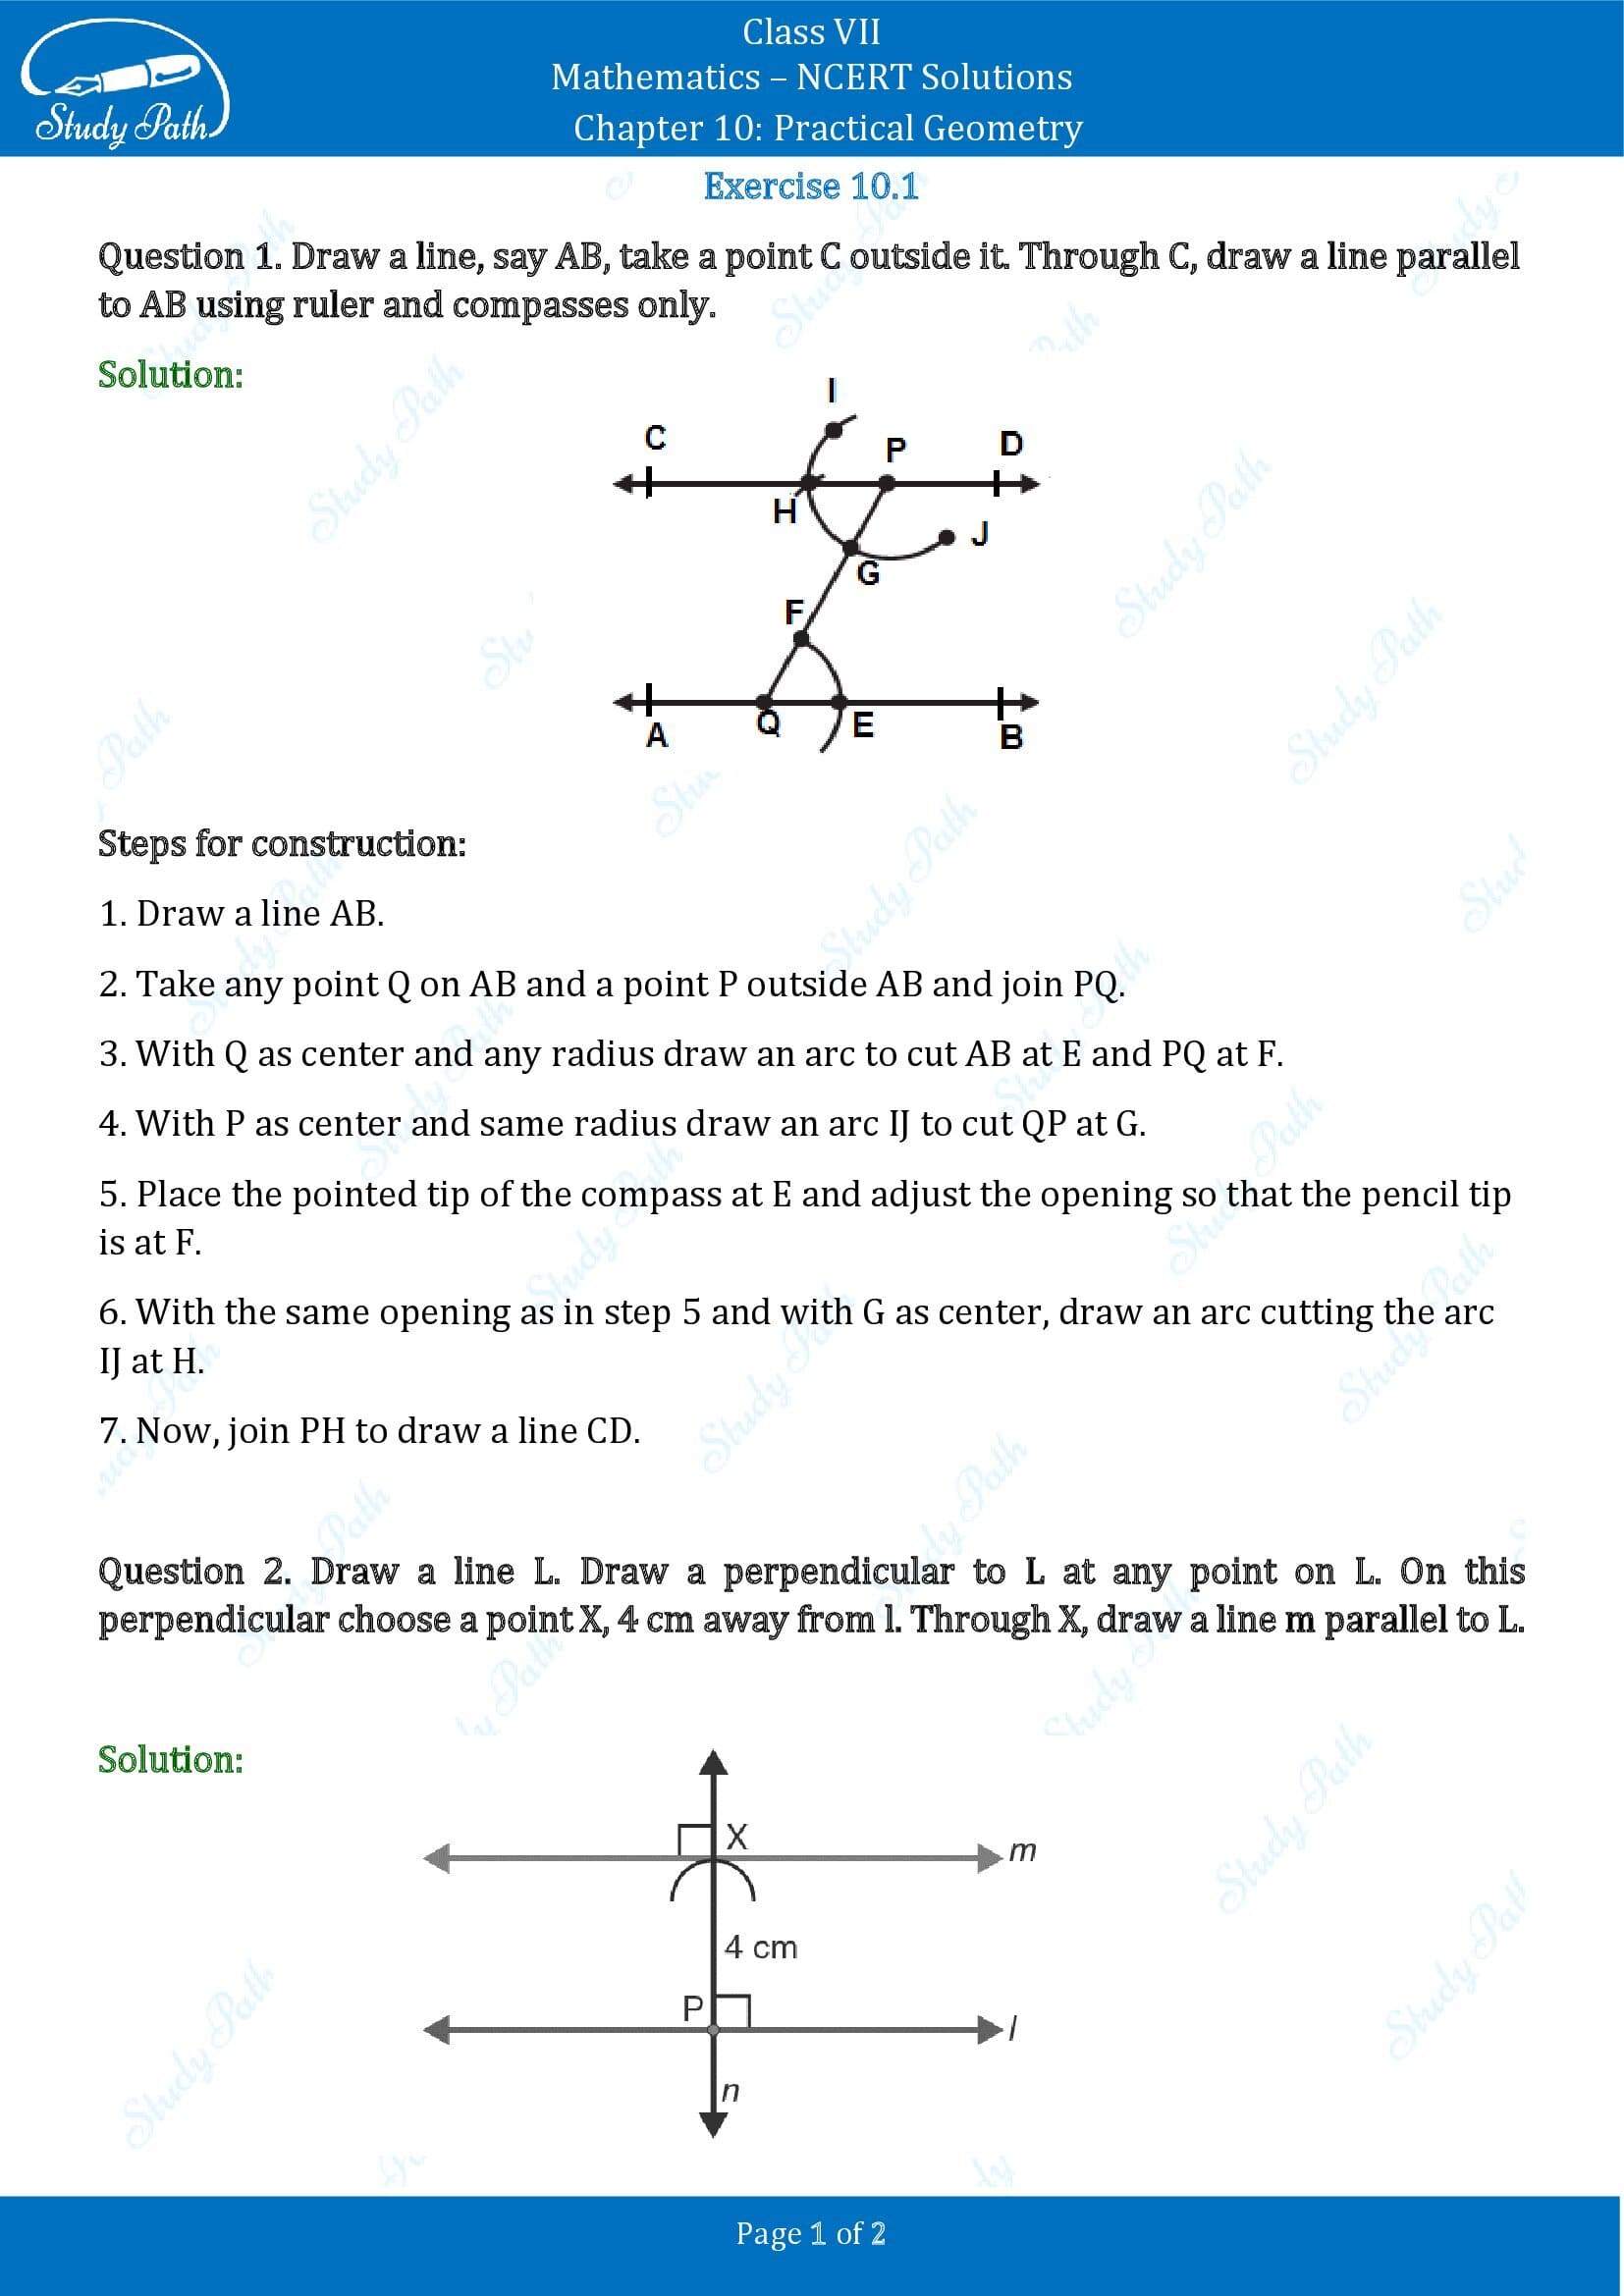 NCERT Solutions for Class 7 Maths Chapter 10 Practical Geometry Exercise 10.1 00001